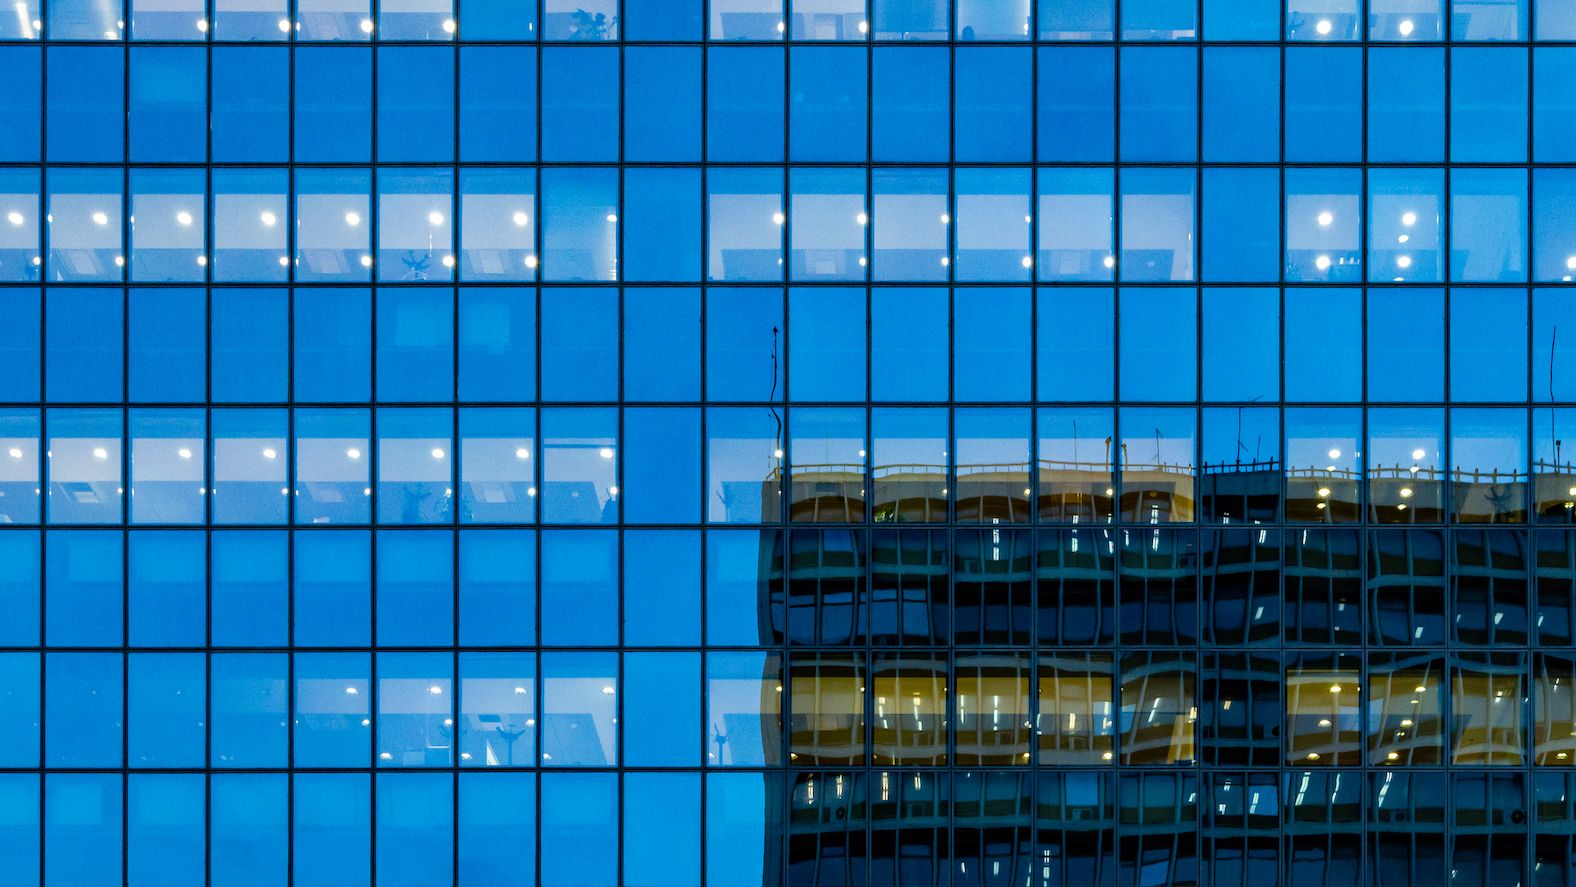 The reflection of an office building on the facade of another total-glass building across. The remaining glass area looks blue from the reflection of the sky.